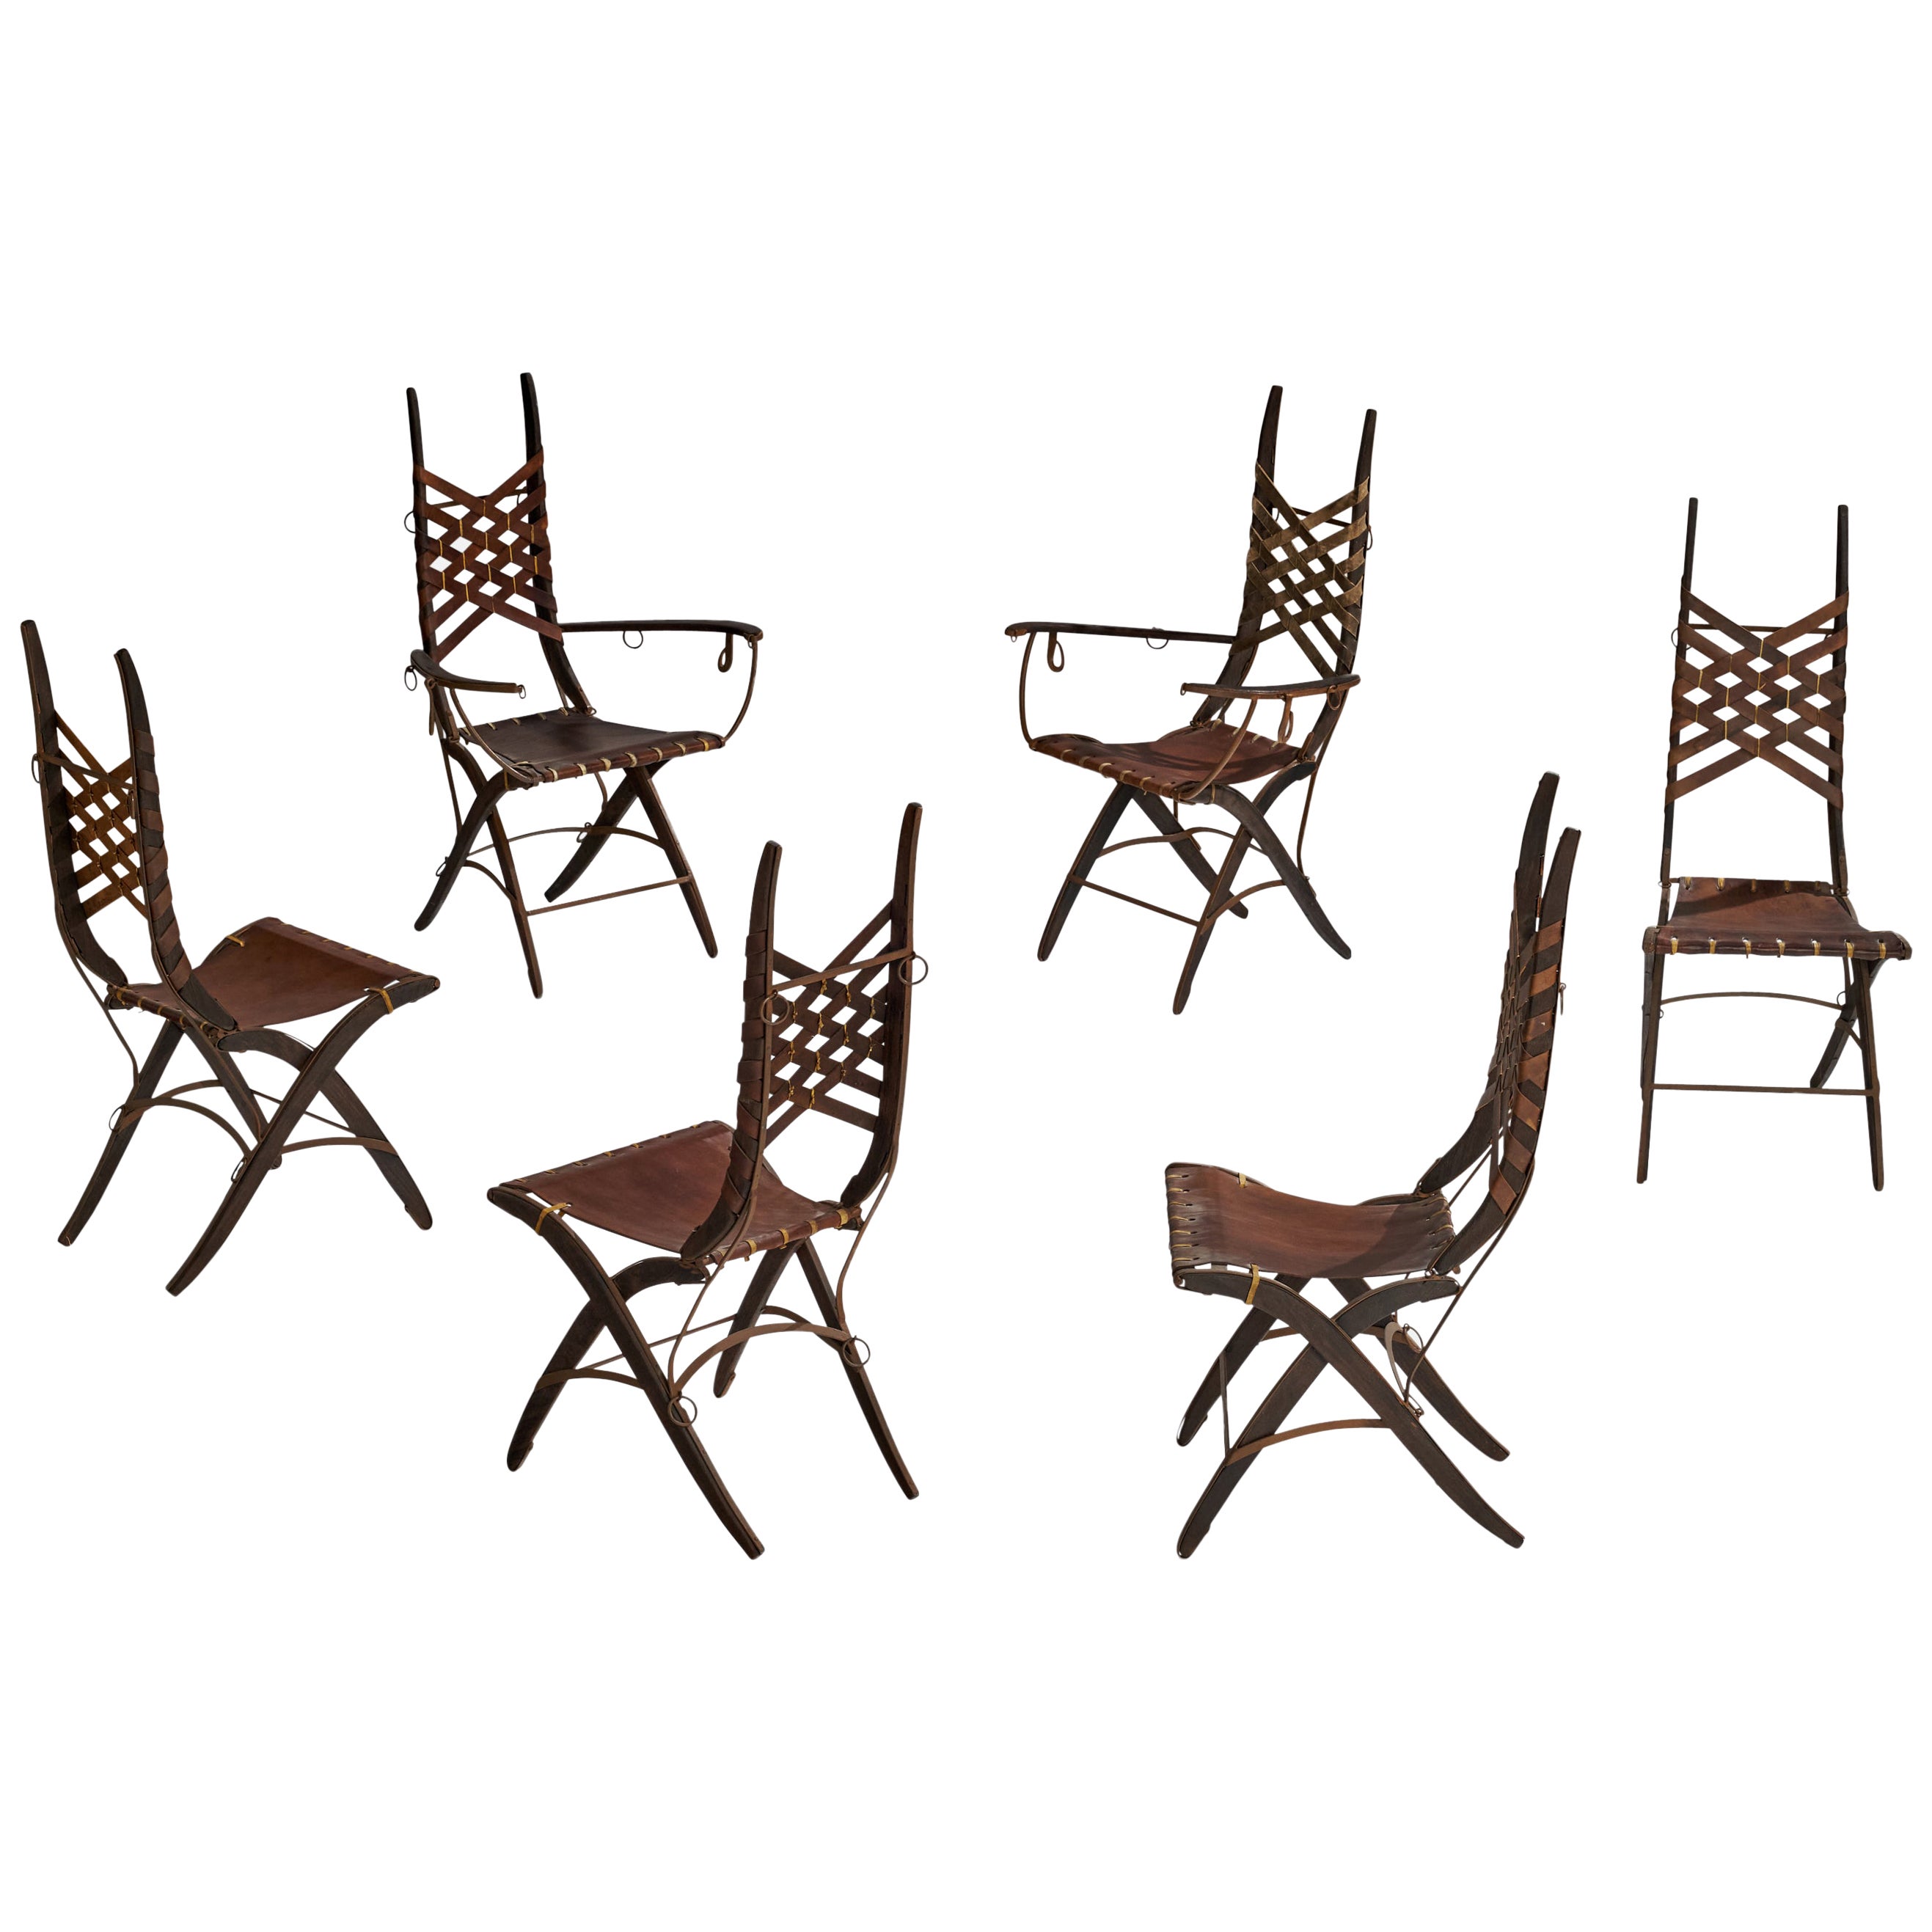 Alberto Marconetti, Dining Chairs, Iron, Oak, Leather, Italy, 1960s